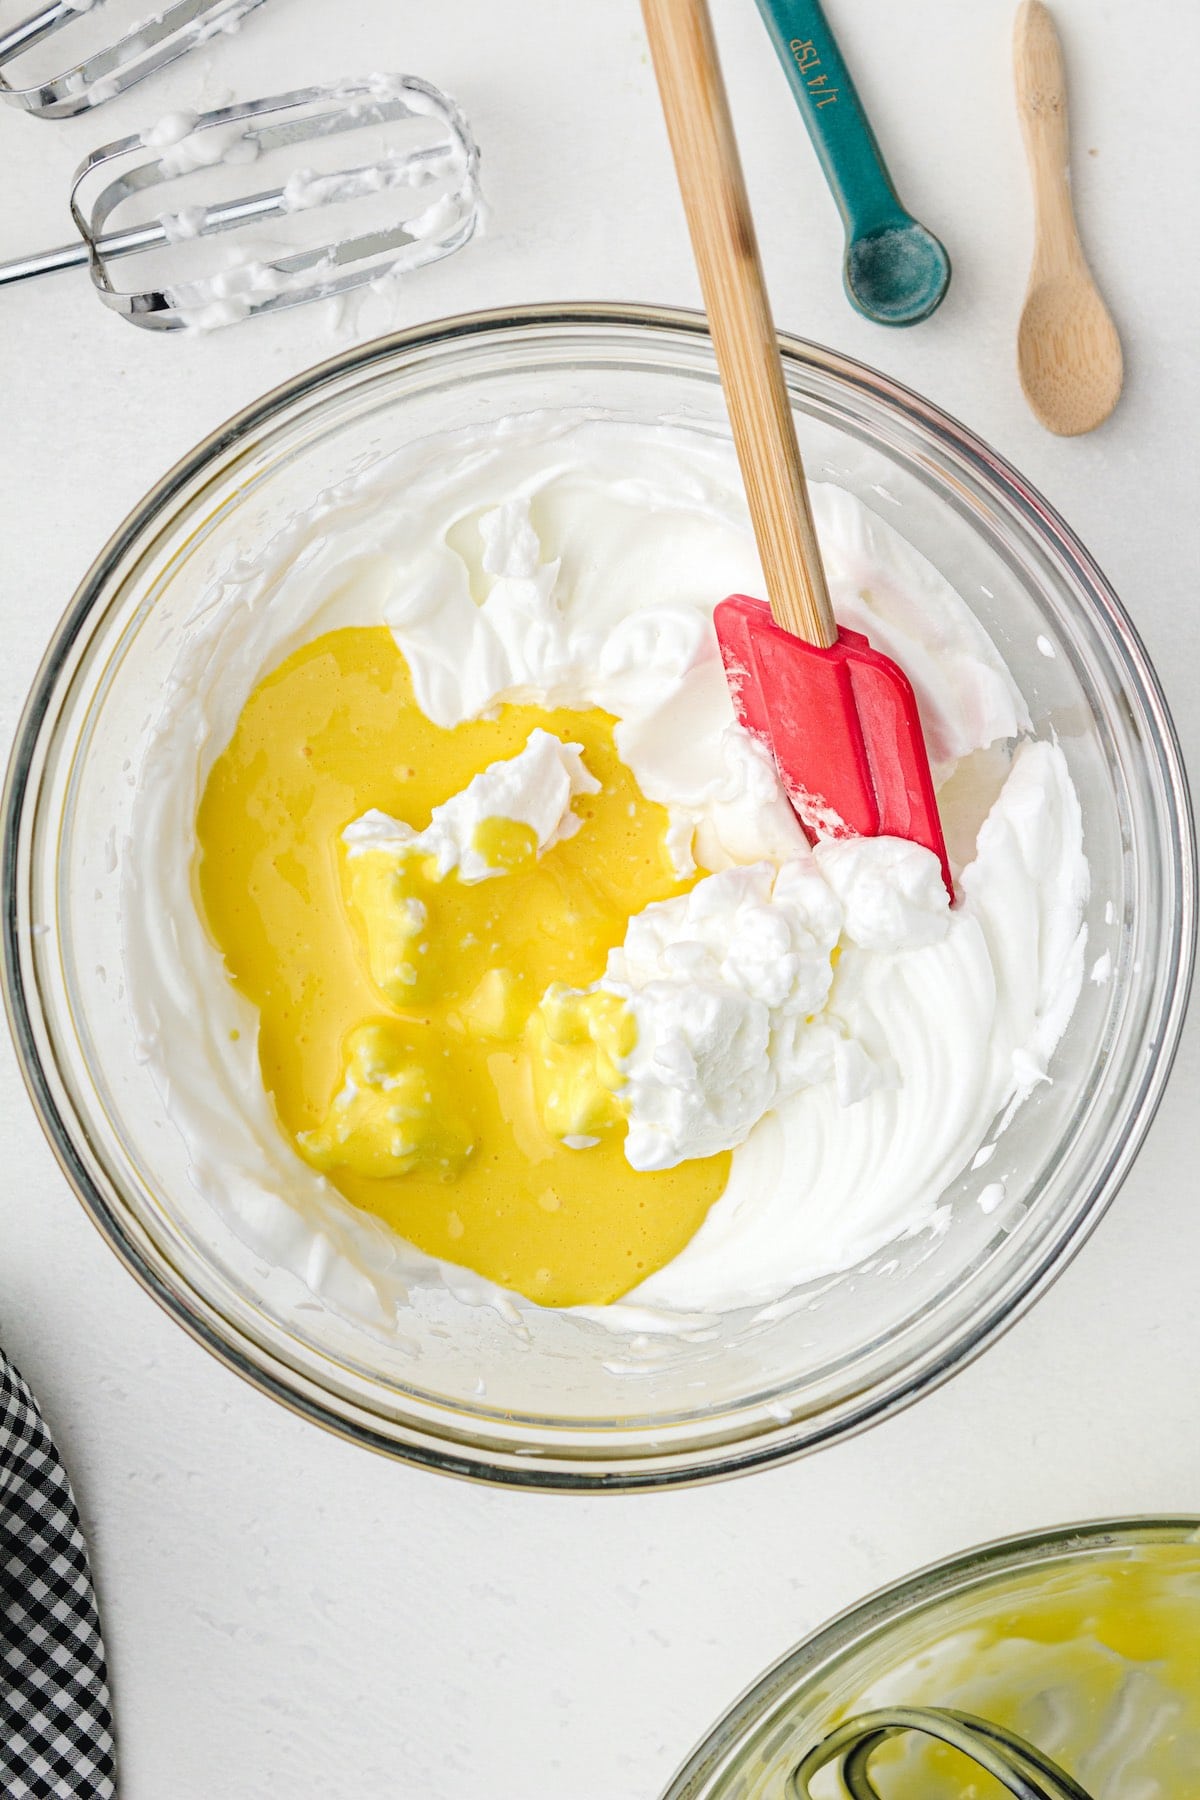 combine yolk mixture and egg whites